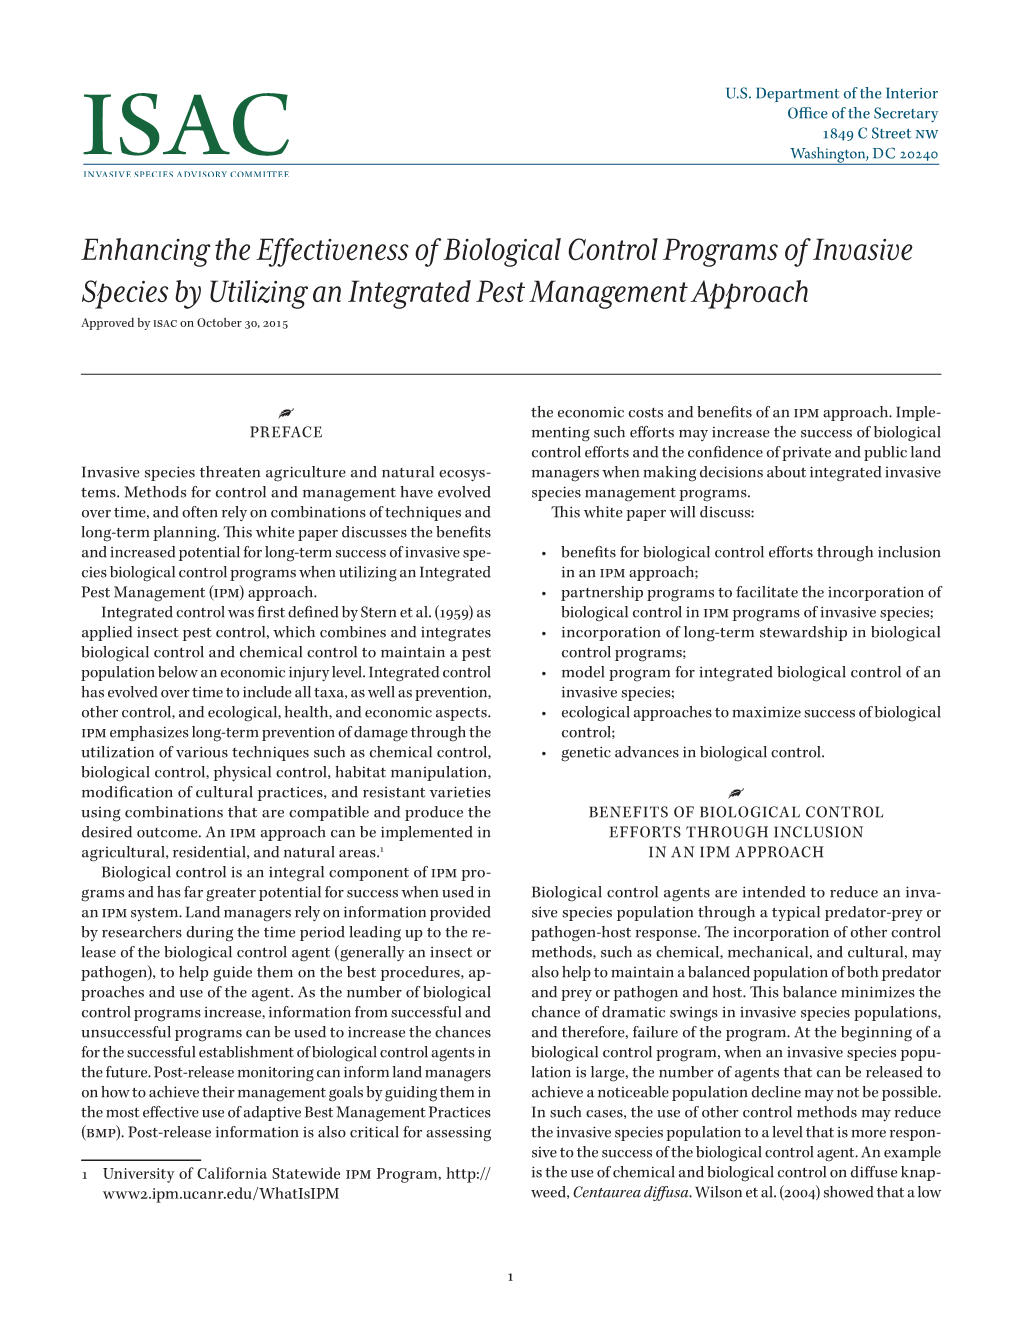 Enhancing the Effectiveness of Biological Control Programs of Invasive Species by Utilizing an Integrated Pest Management Approa